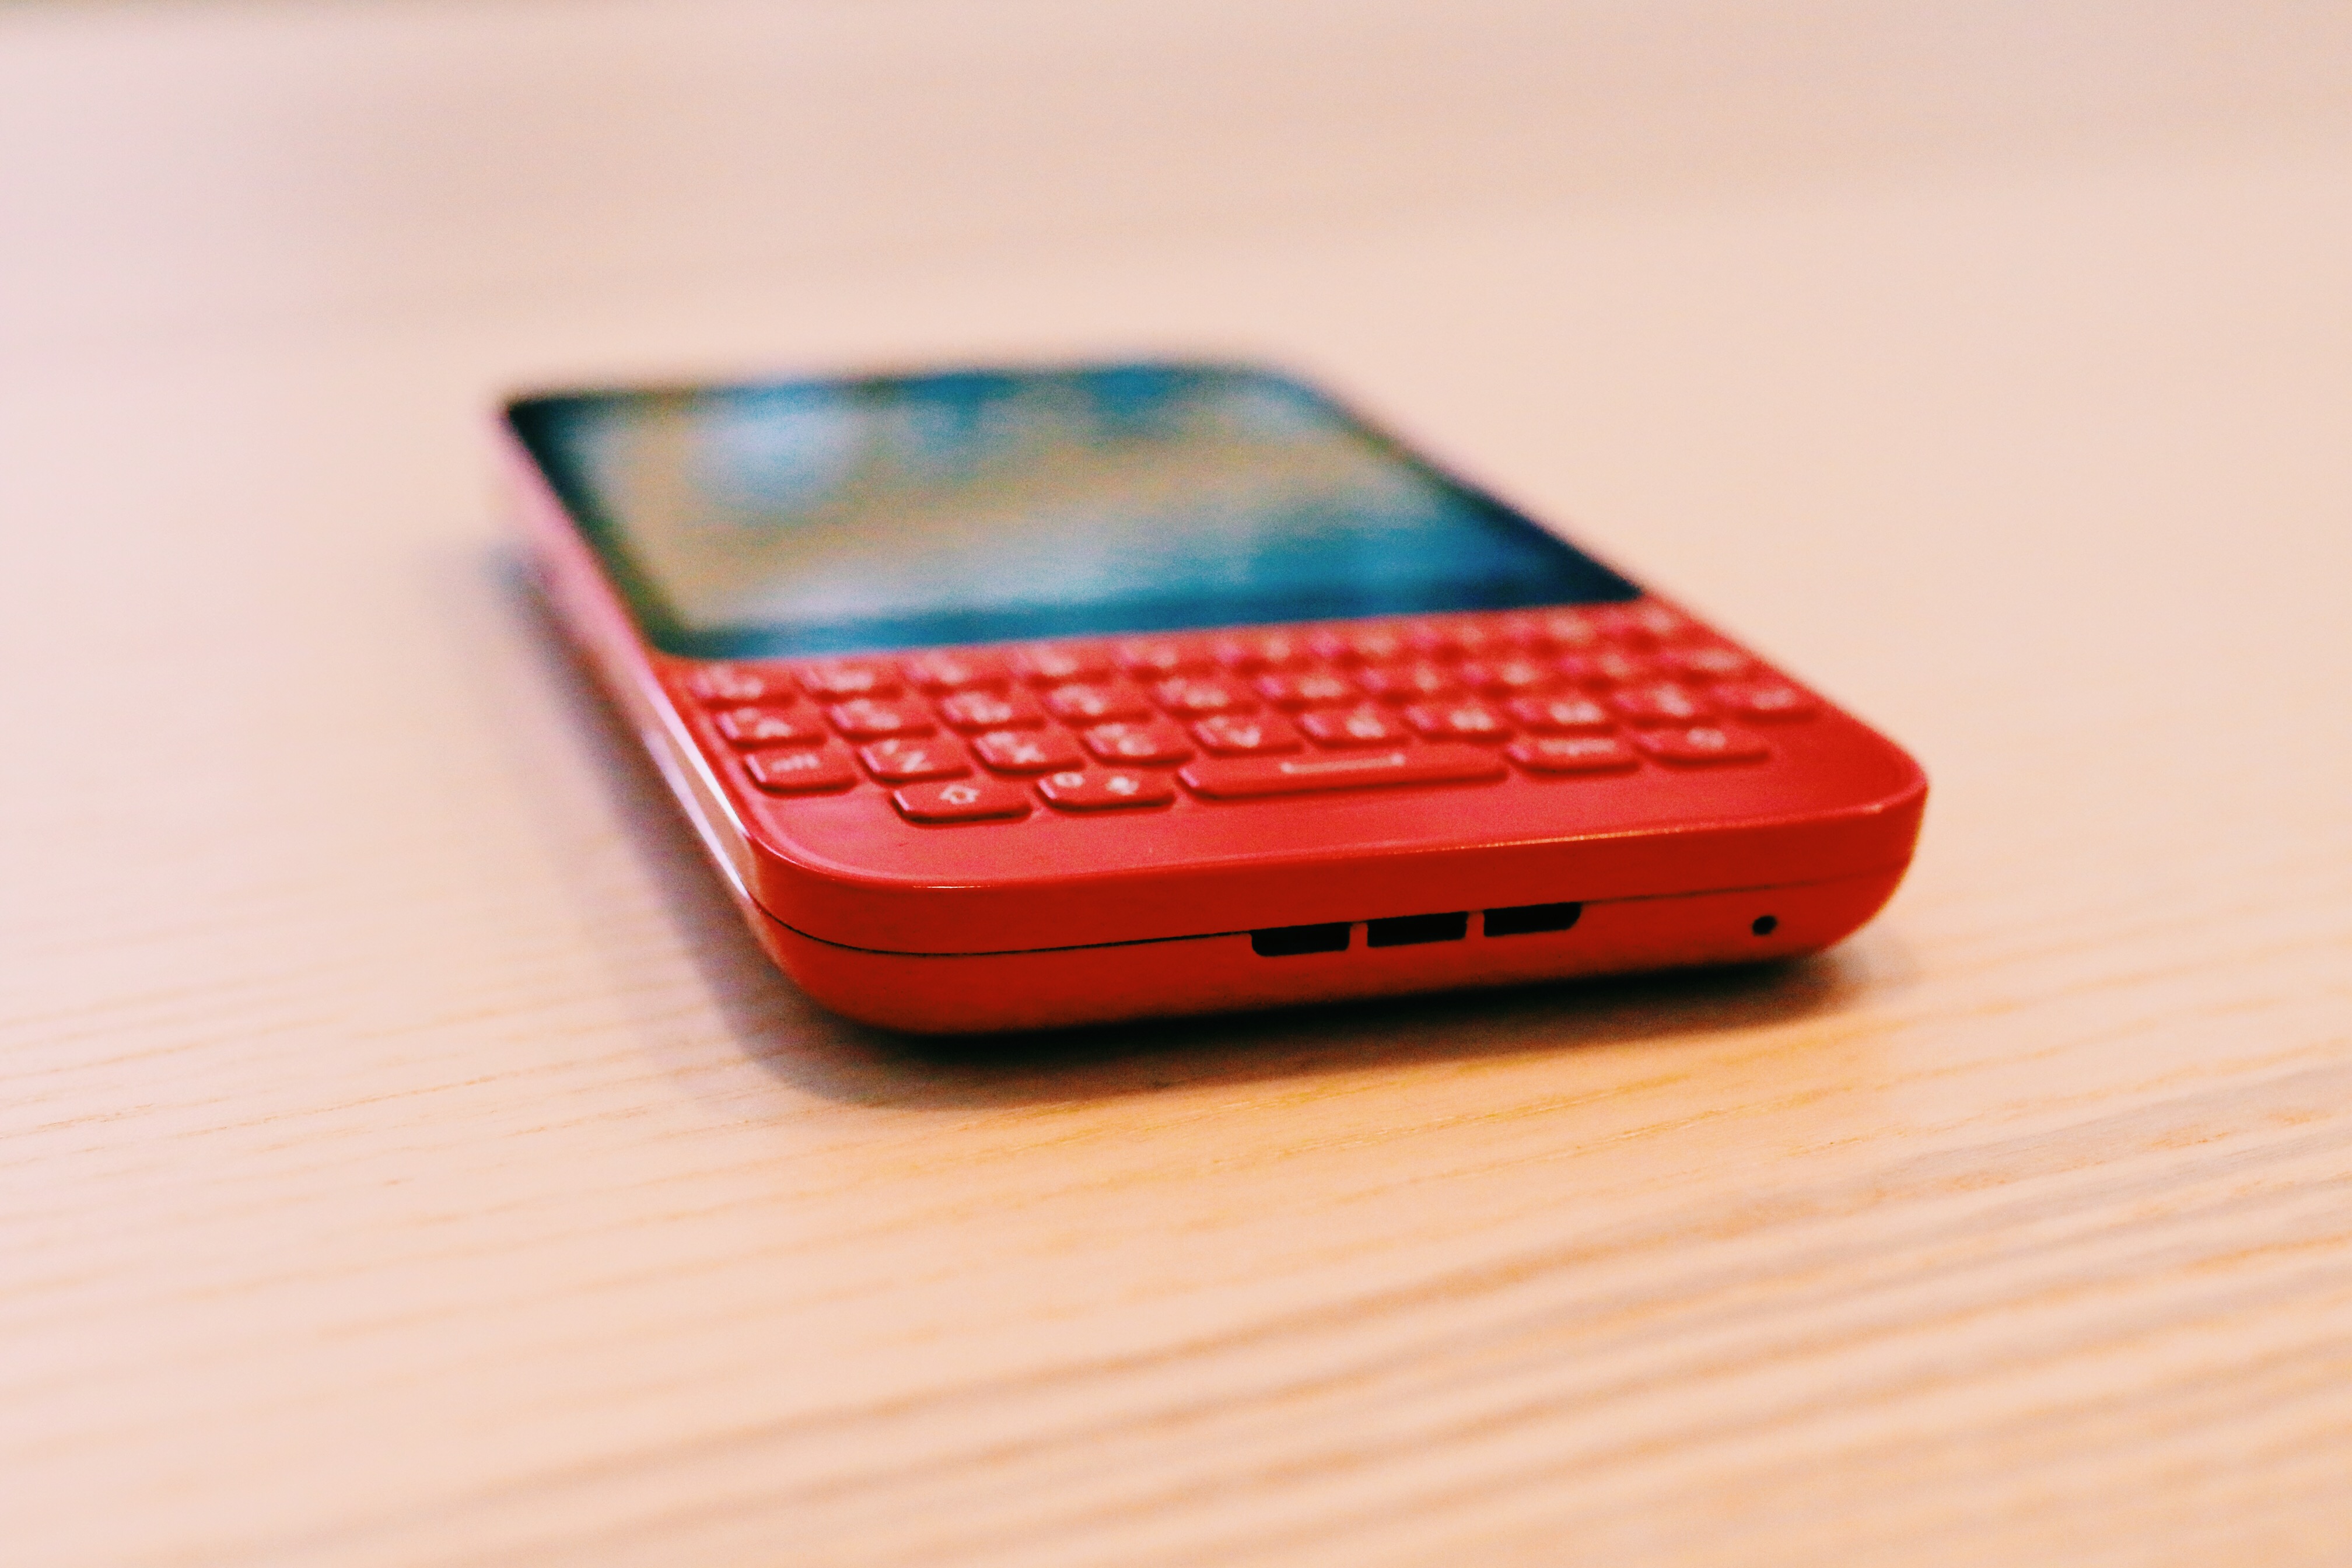 Blackberry Q5 QWERTY Smartphone In Black, White, Red and Pink Colors 3D ...